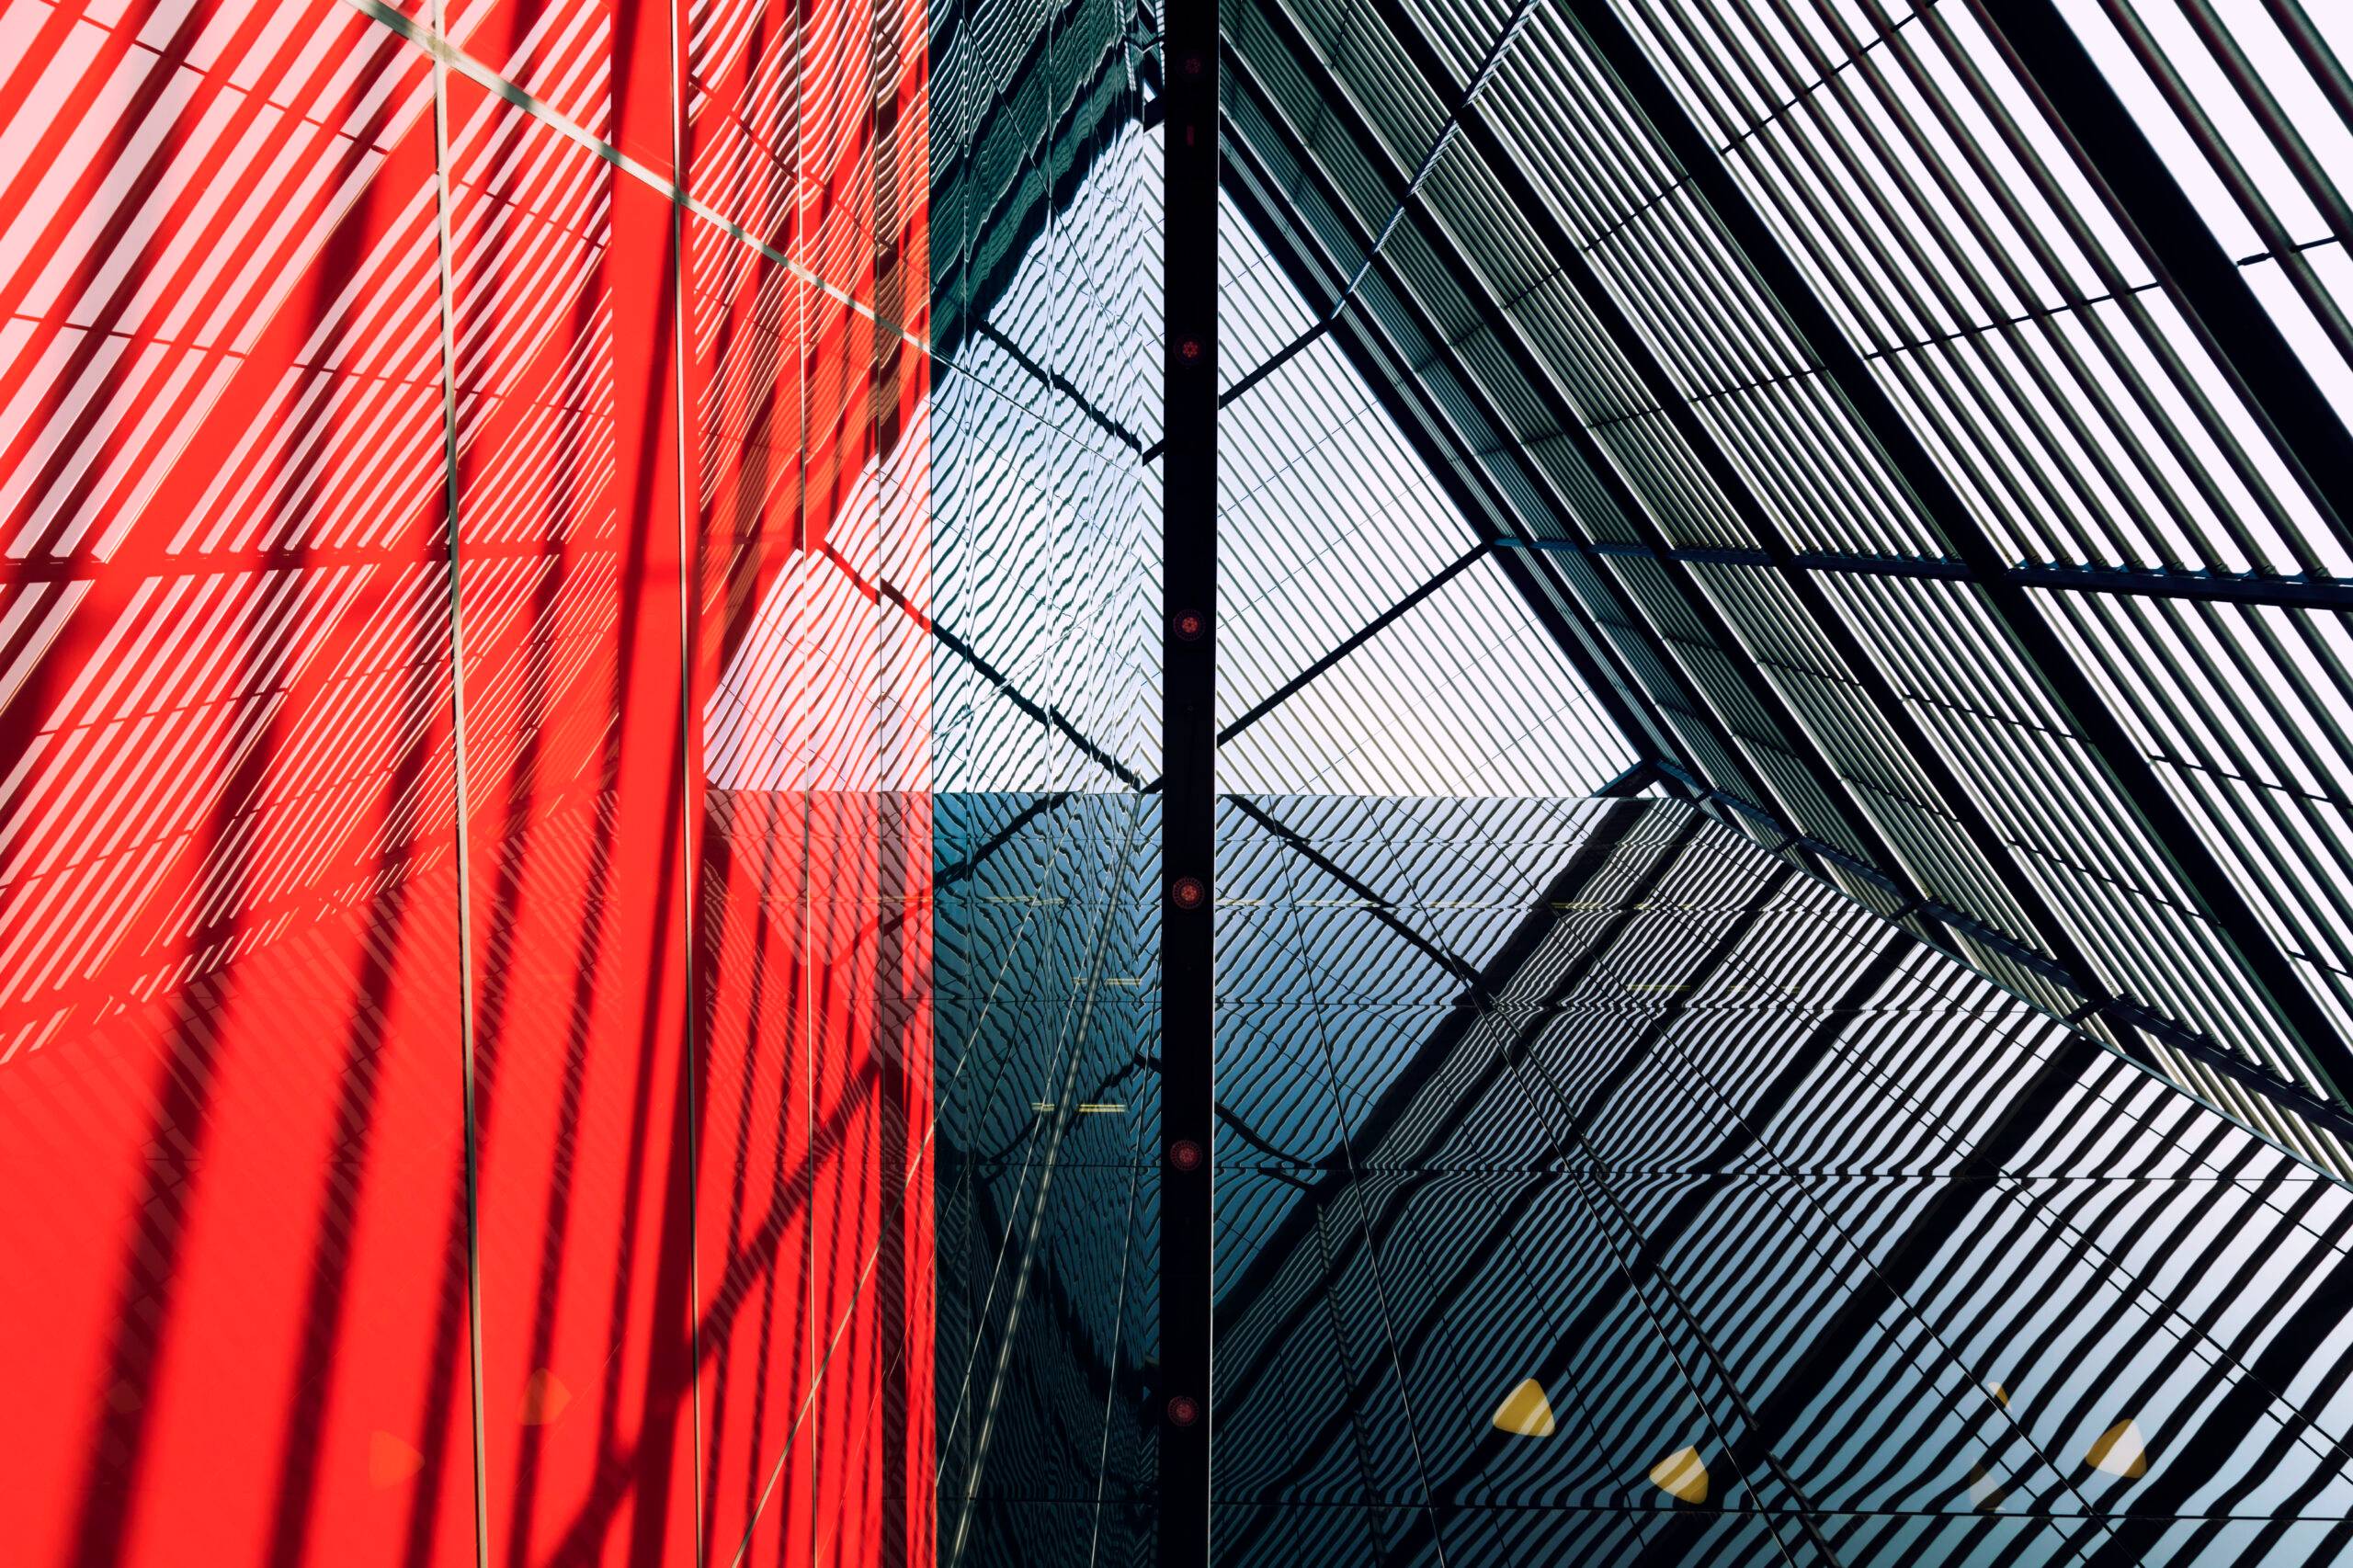 Internal steel structure of modern car park, public building, red and black colors